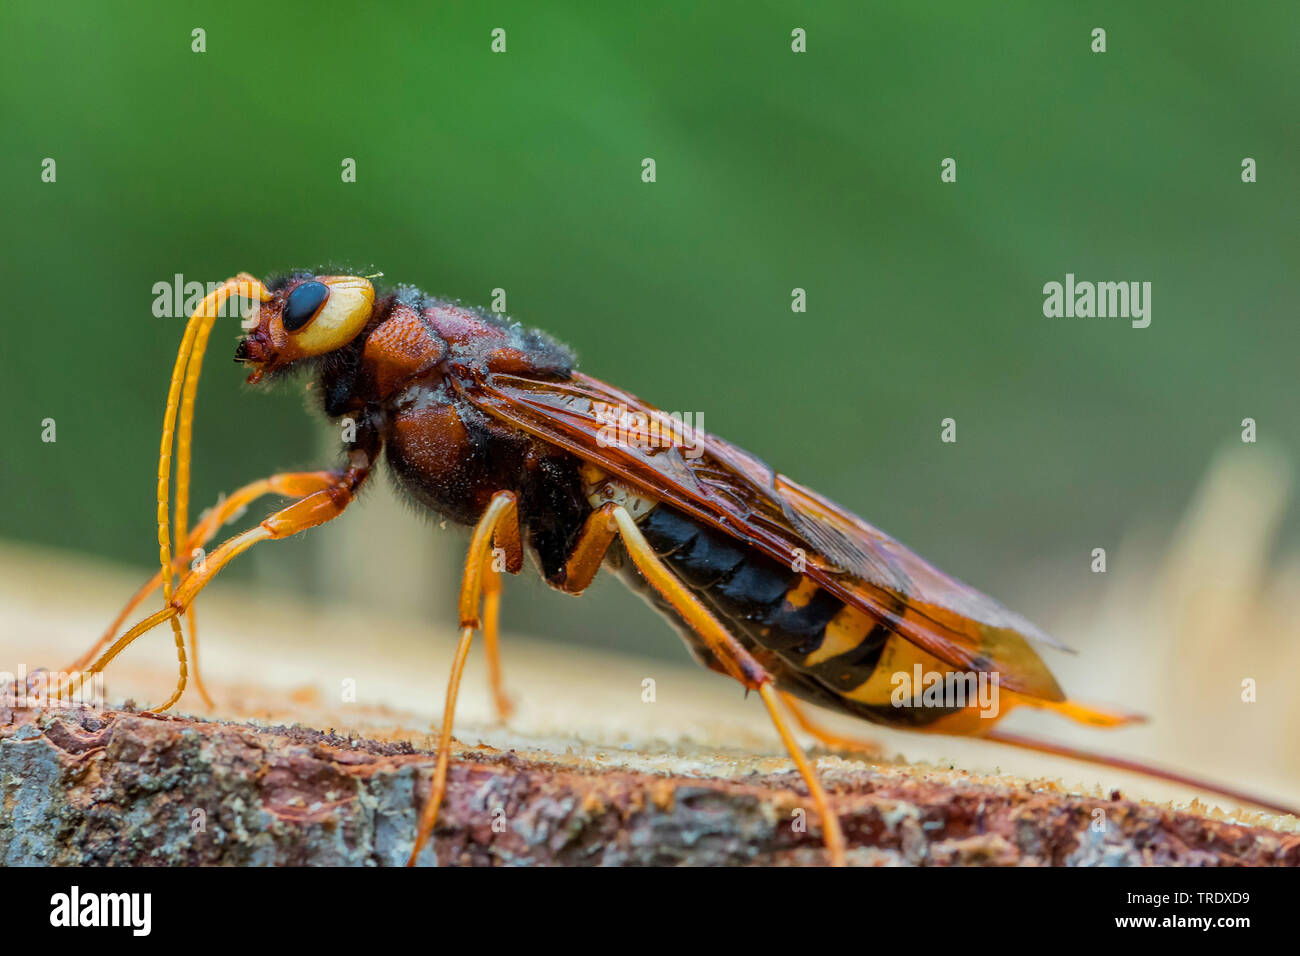 giant wood wasp, giant horntail, greater horntail (Urocerus gigas), grooming its feelers, side view, Germany, Bavaria, Niederbayern, Lower Bavaria Stock Photo